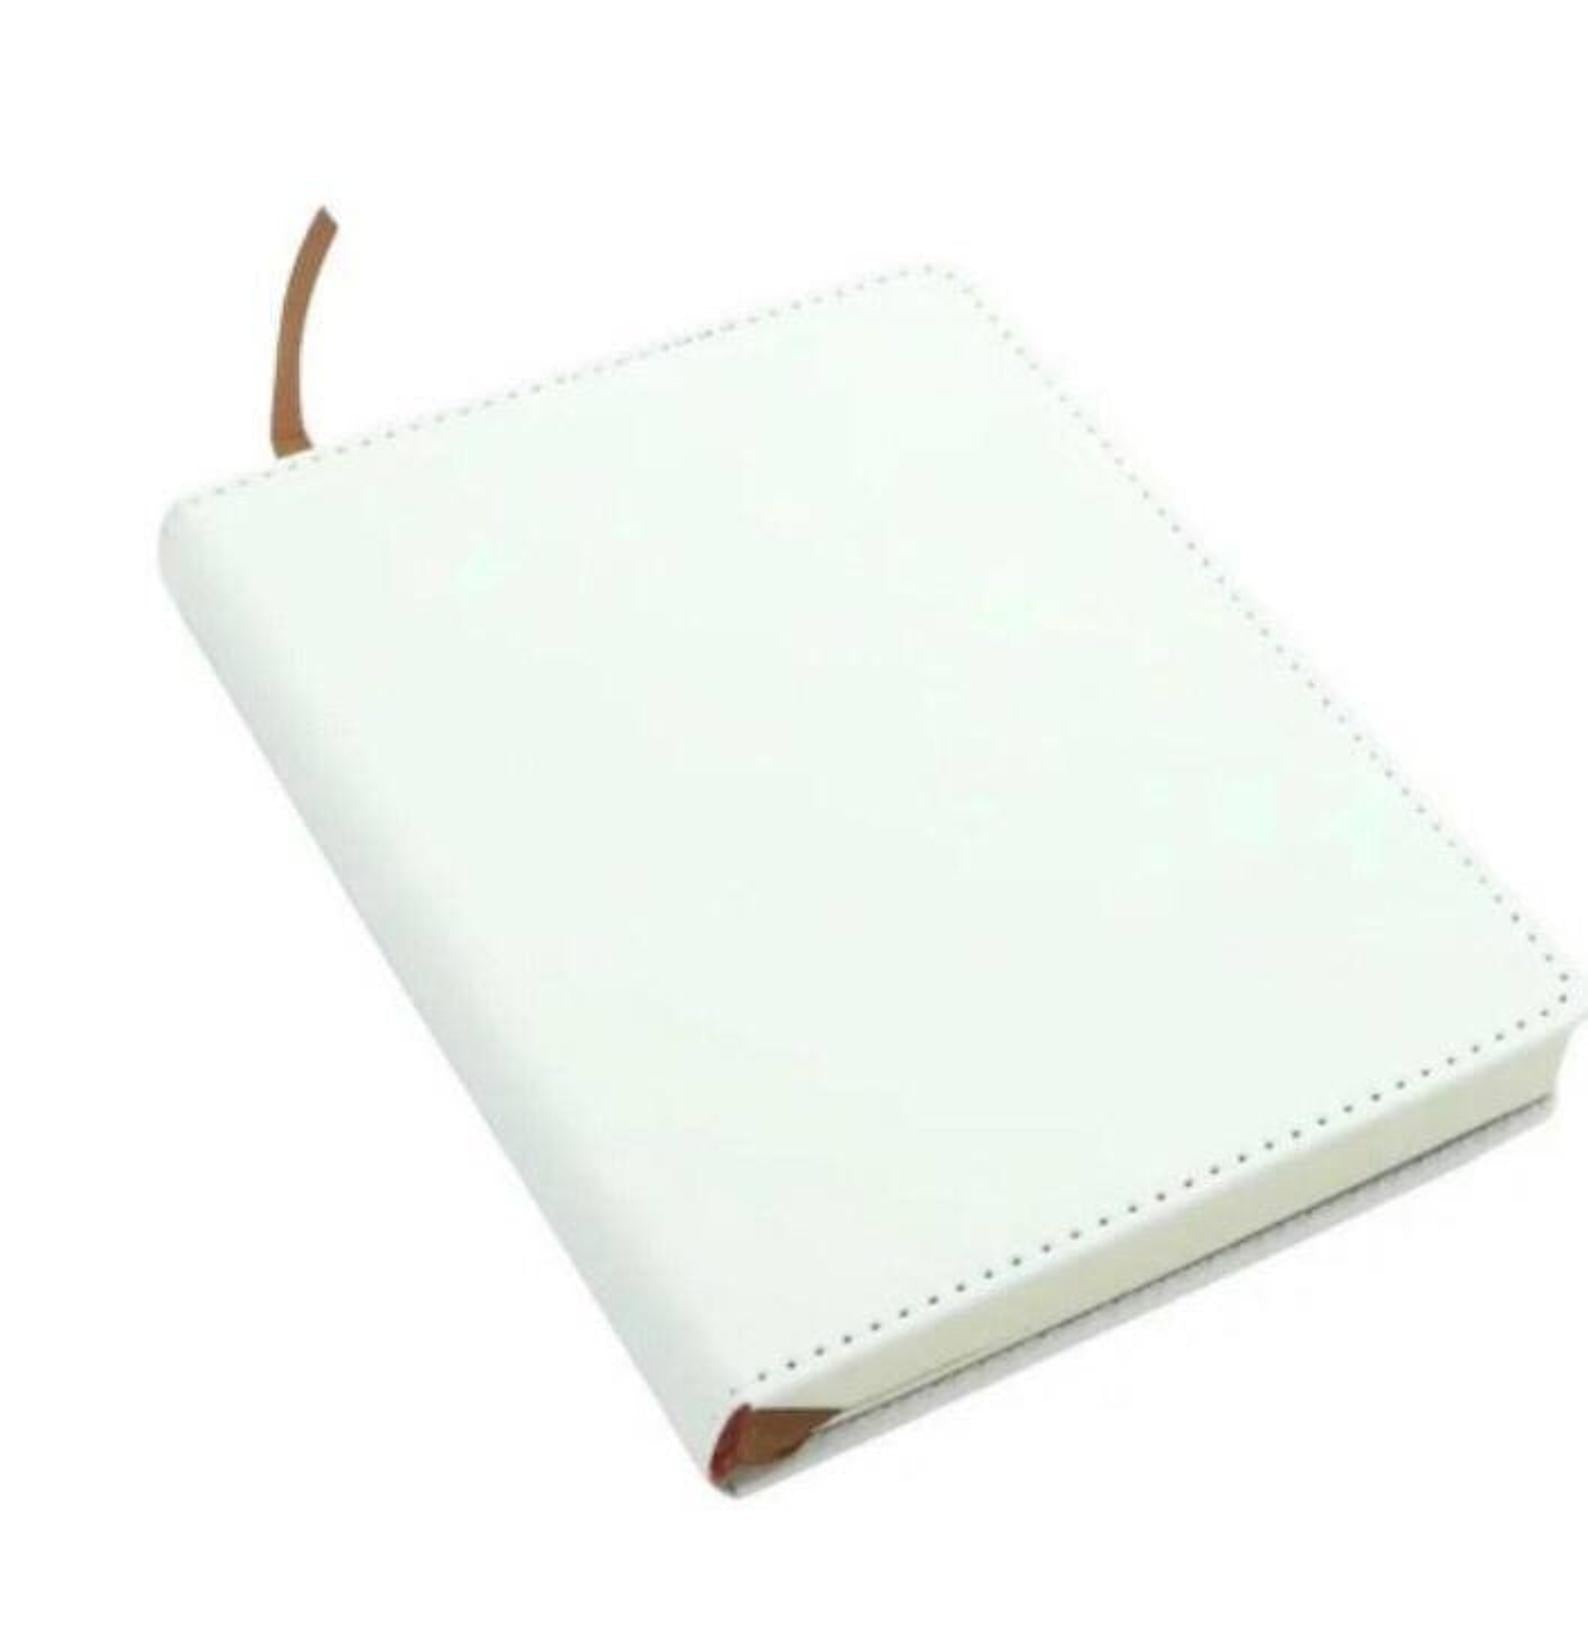 Sublimation Blank Notebooks Faux Leather Notebooks